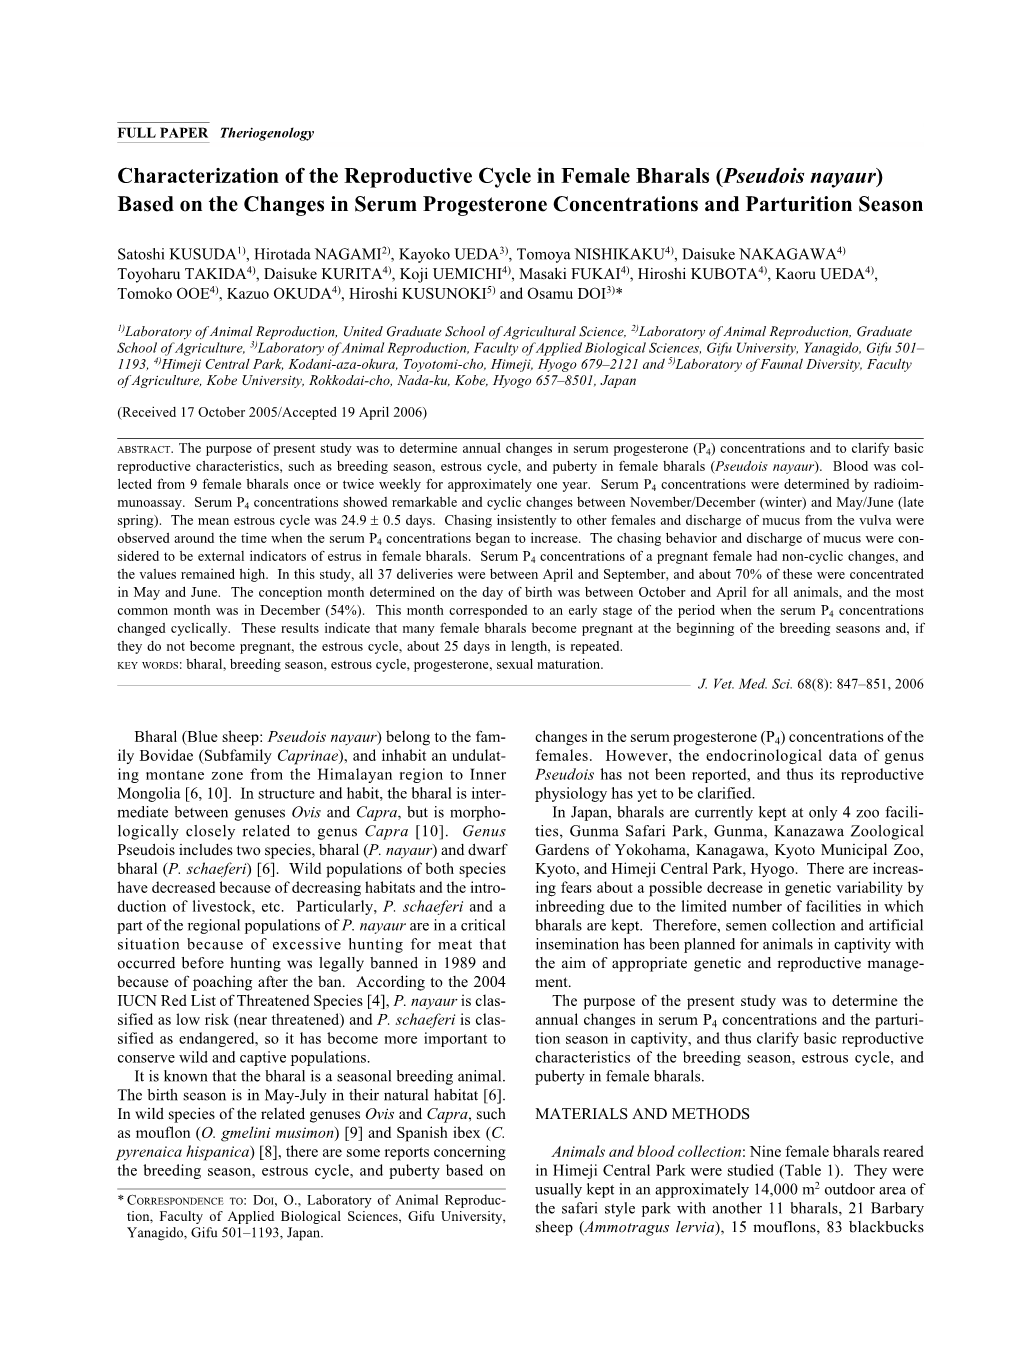 Characterization of the Reproductive Cycle in Female Bharals (Pseudois Nayaur) Based on the Changes in Serum Progesterone Concentrations and Parturition Season